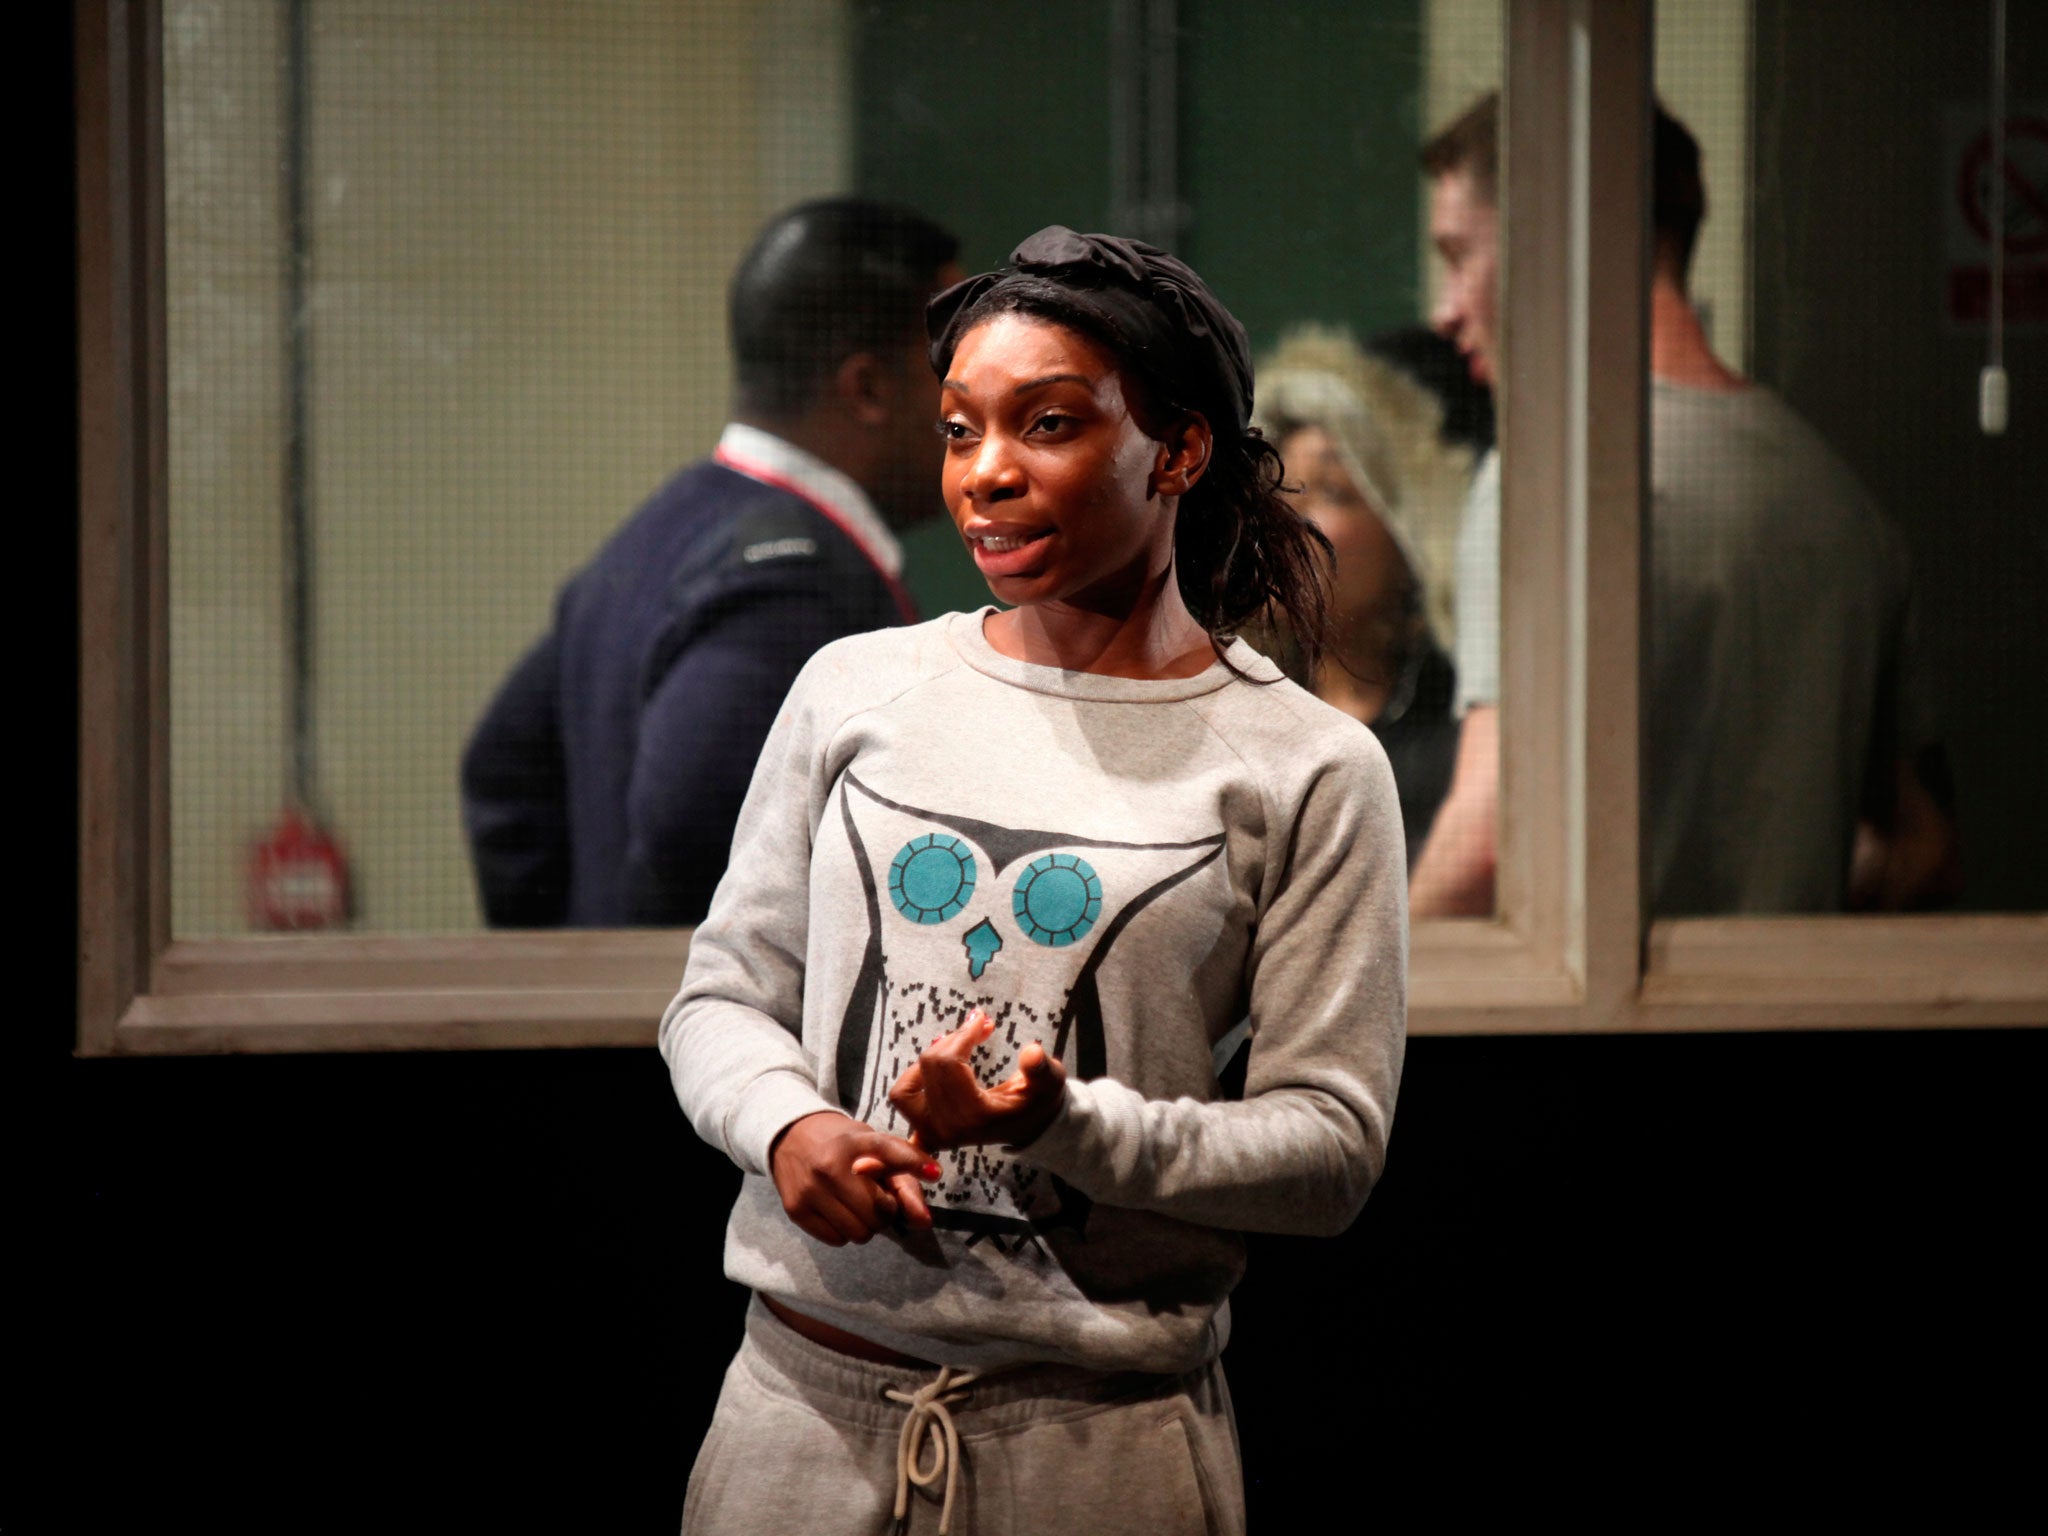 Coel as a mum in a production at the National Theatre (Ellie-Kurttz)